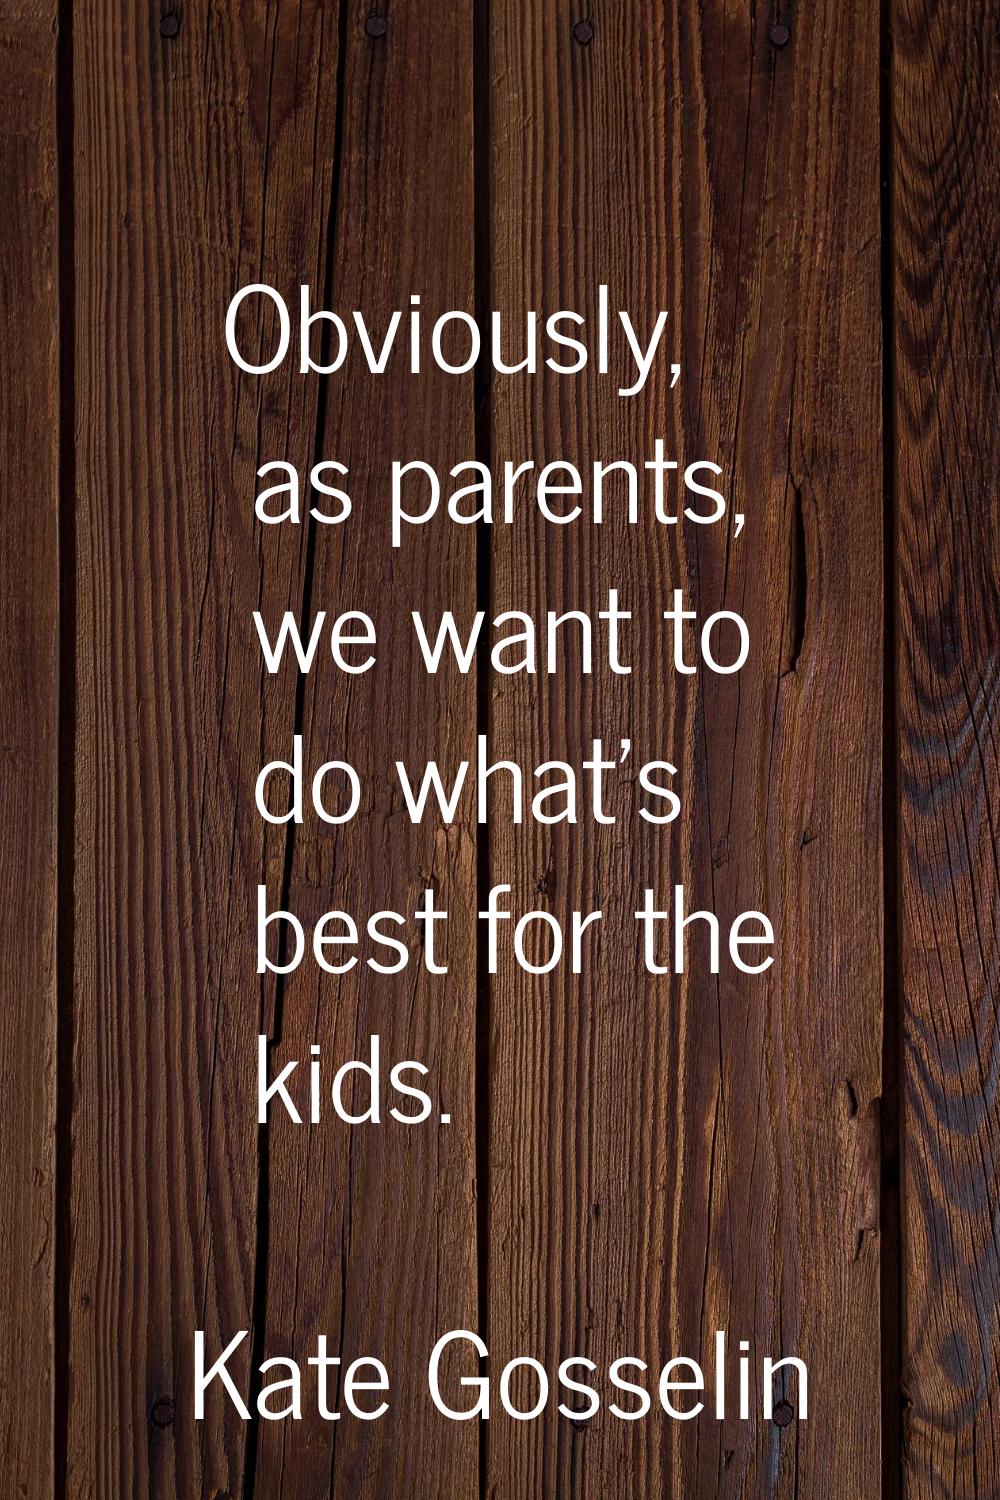 Obviously, as parents, we want to do what's best for the kids.